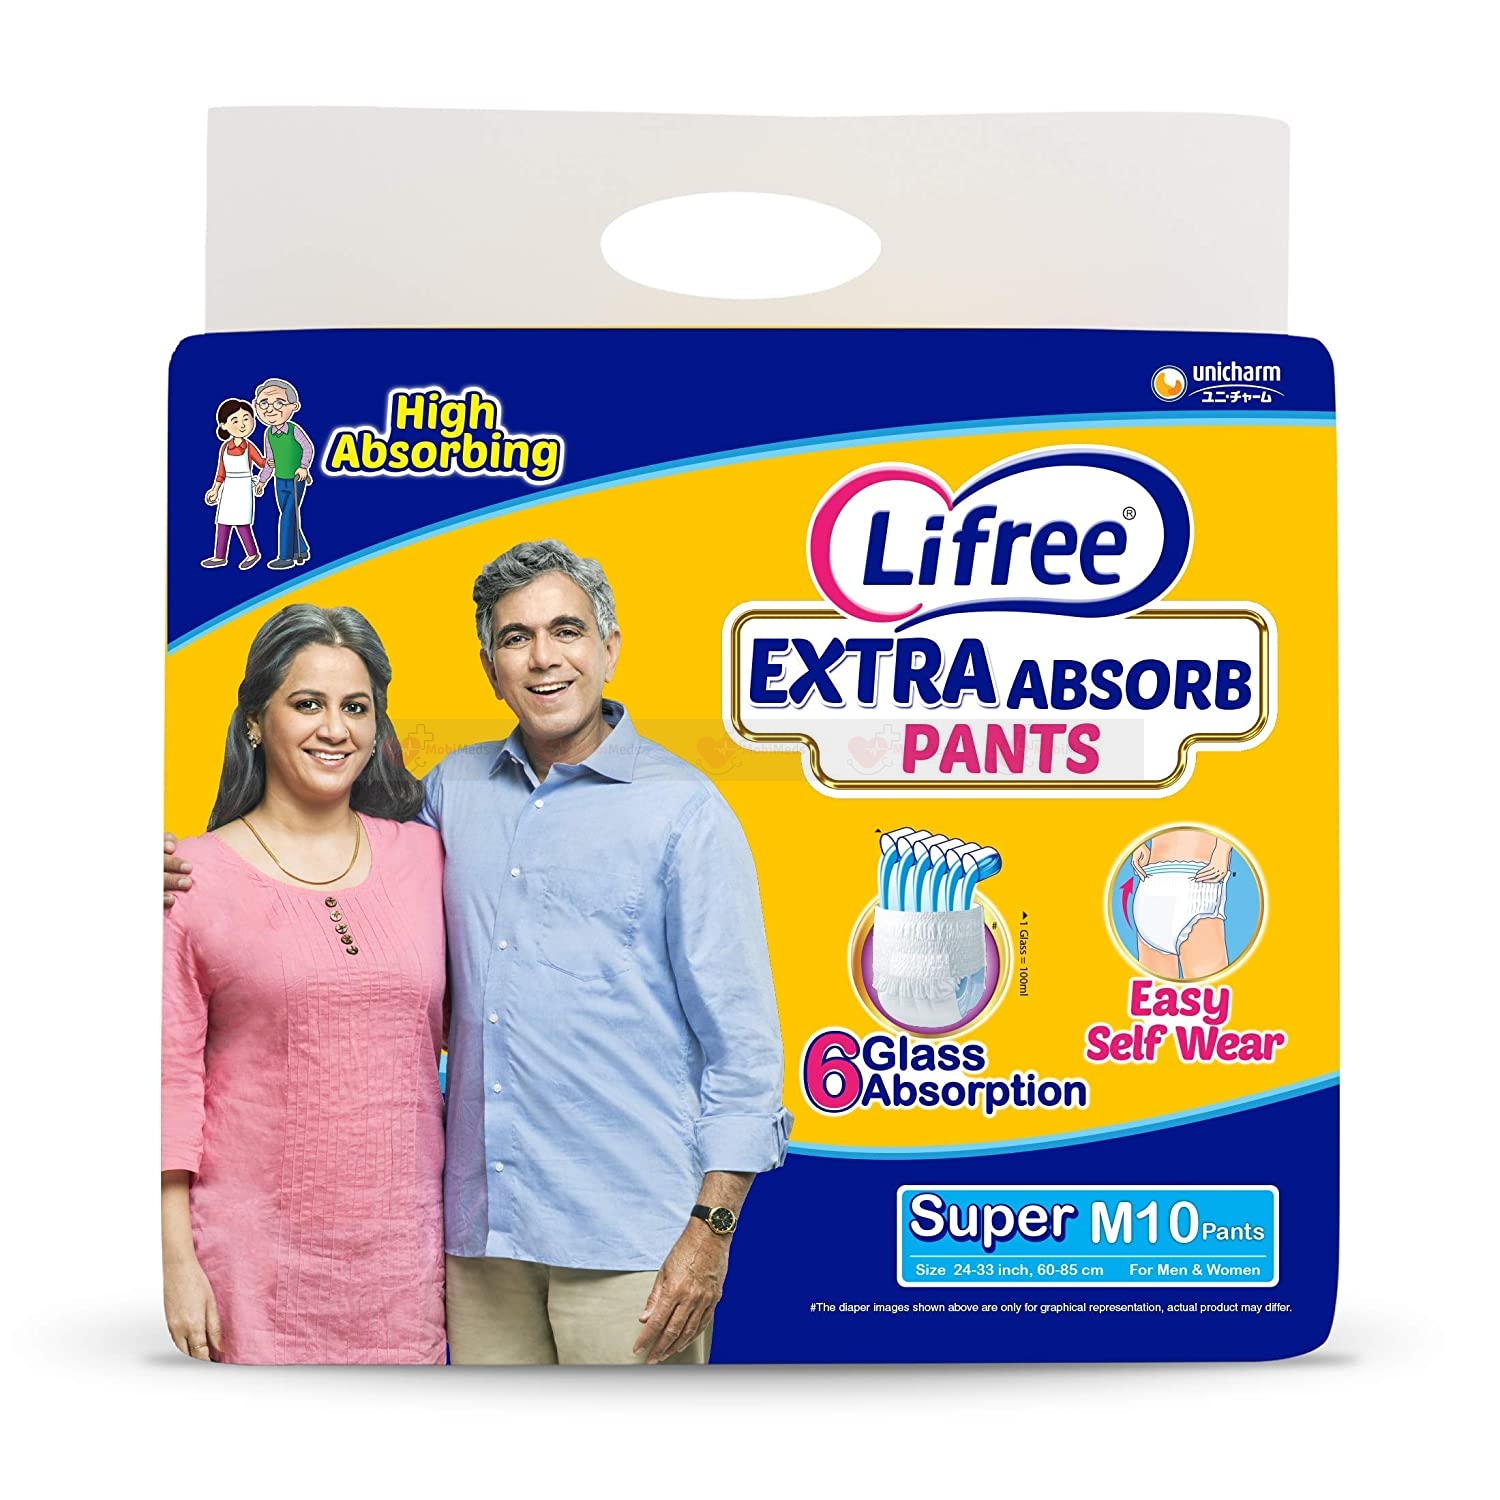 Lifree Extra Absorb adult diaper